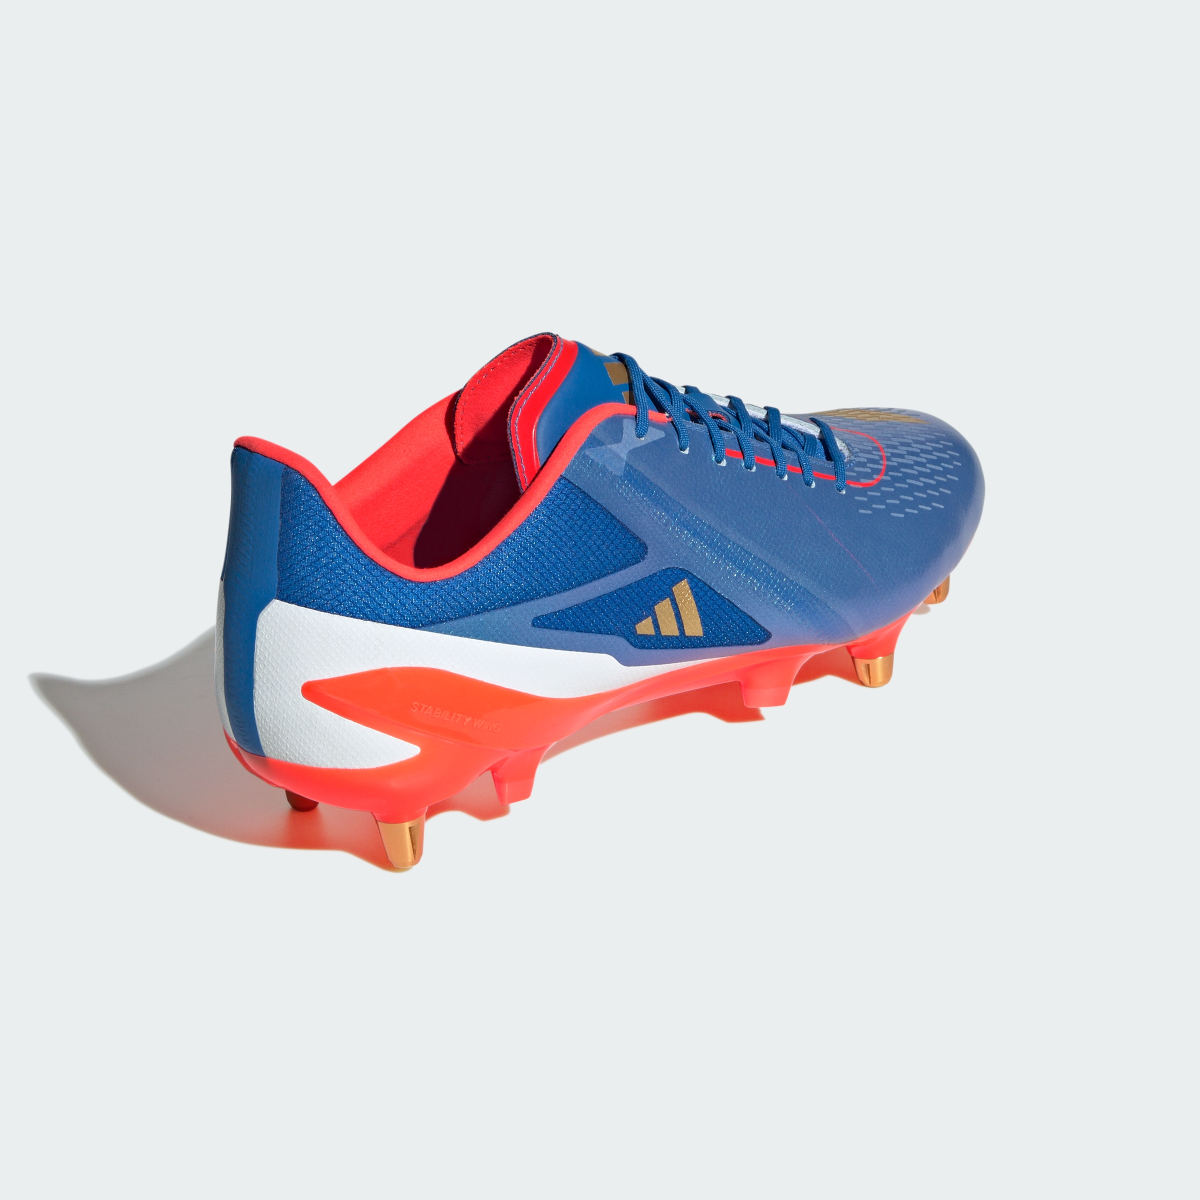 Adidas Adizero RS15 Pro Soft Ground Rugby Boots. 6